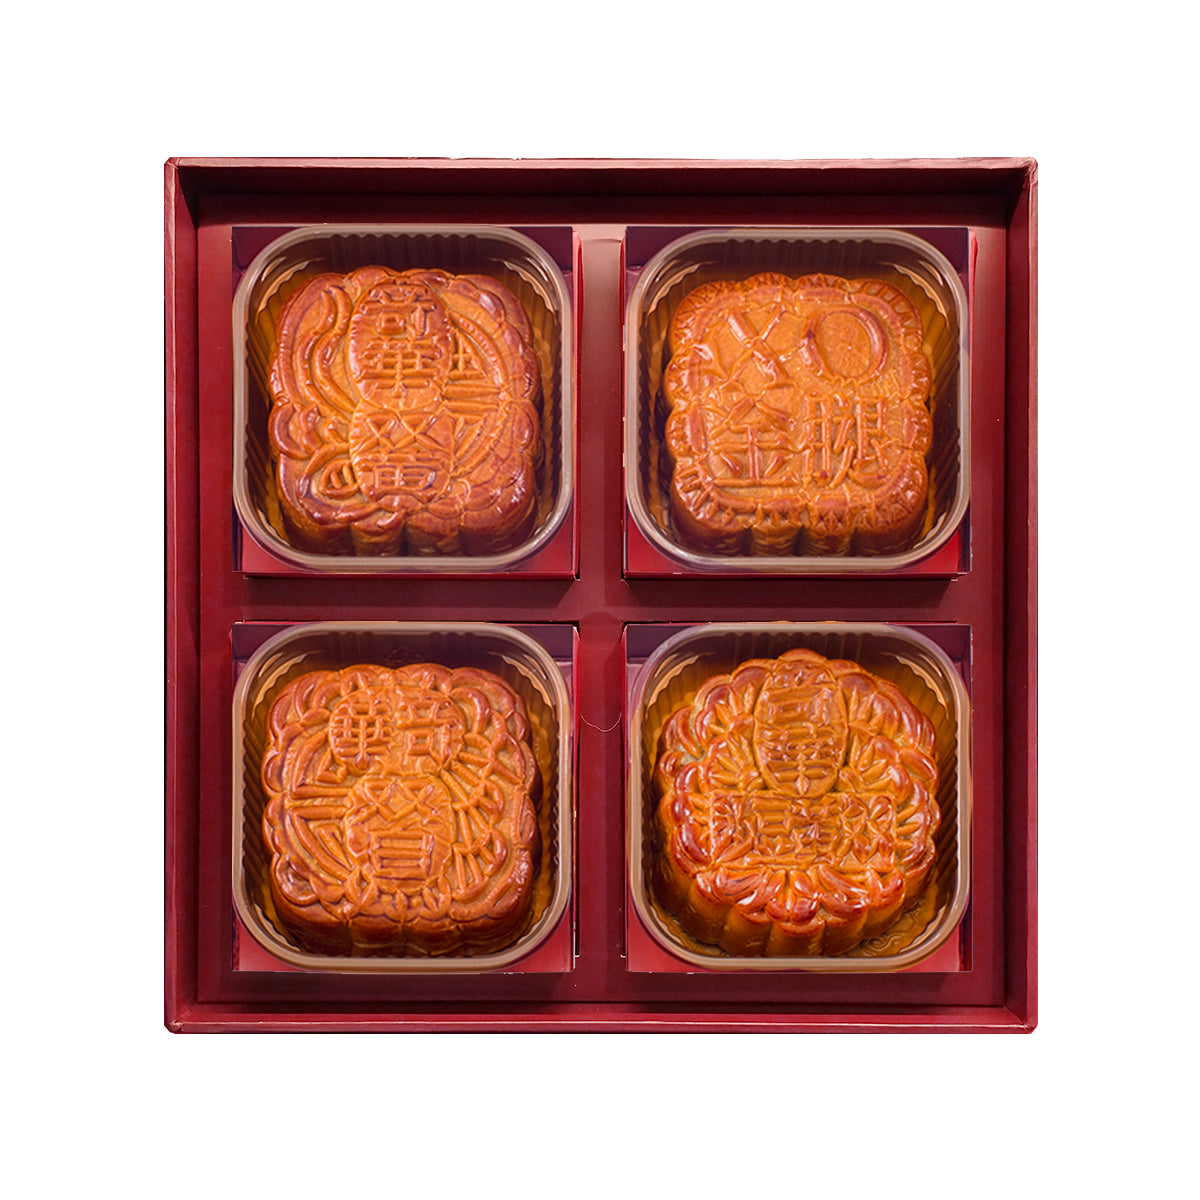 Red Bean Paste Mooncake Gift Box - 4 Pack by Kee Wah Bakery | Goldbelly